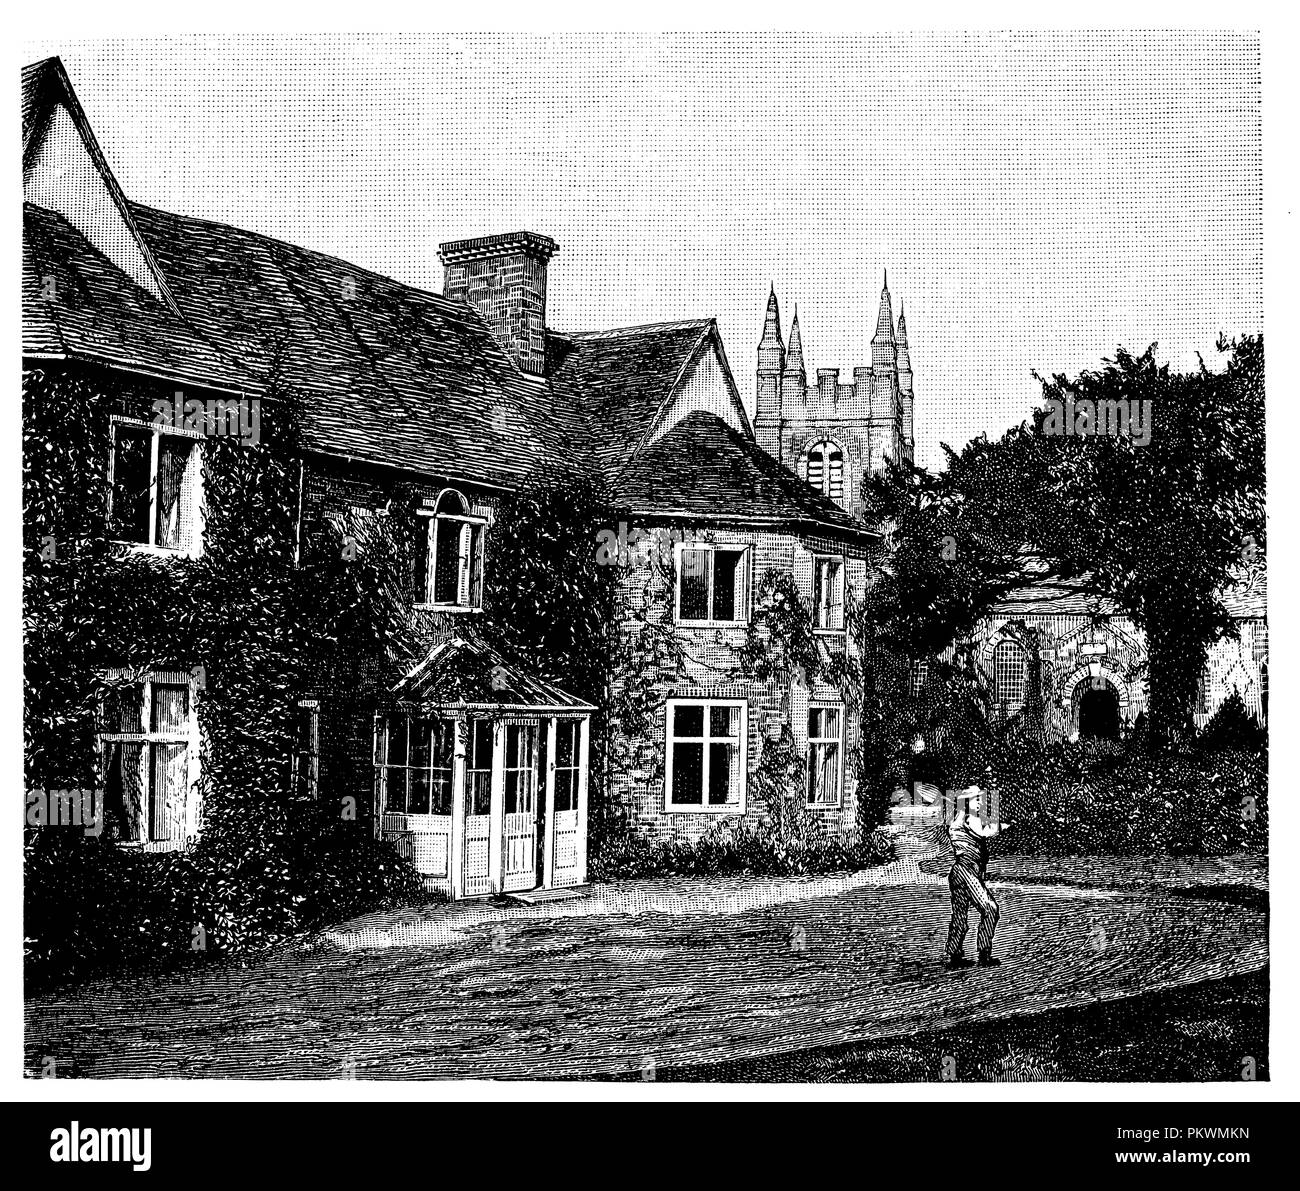 Kingsley, Charles (1819-1875), English Anglican clergyman, theologian and writer: Kingsley's rectory in Eversley, Stock Photo